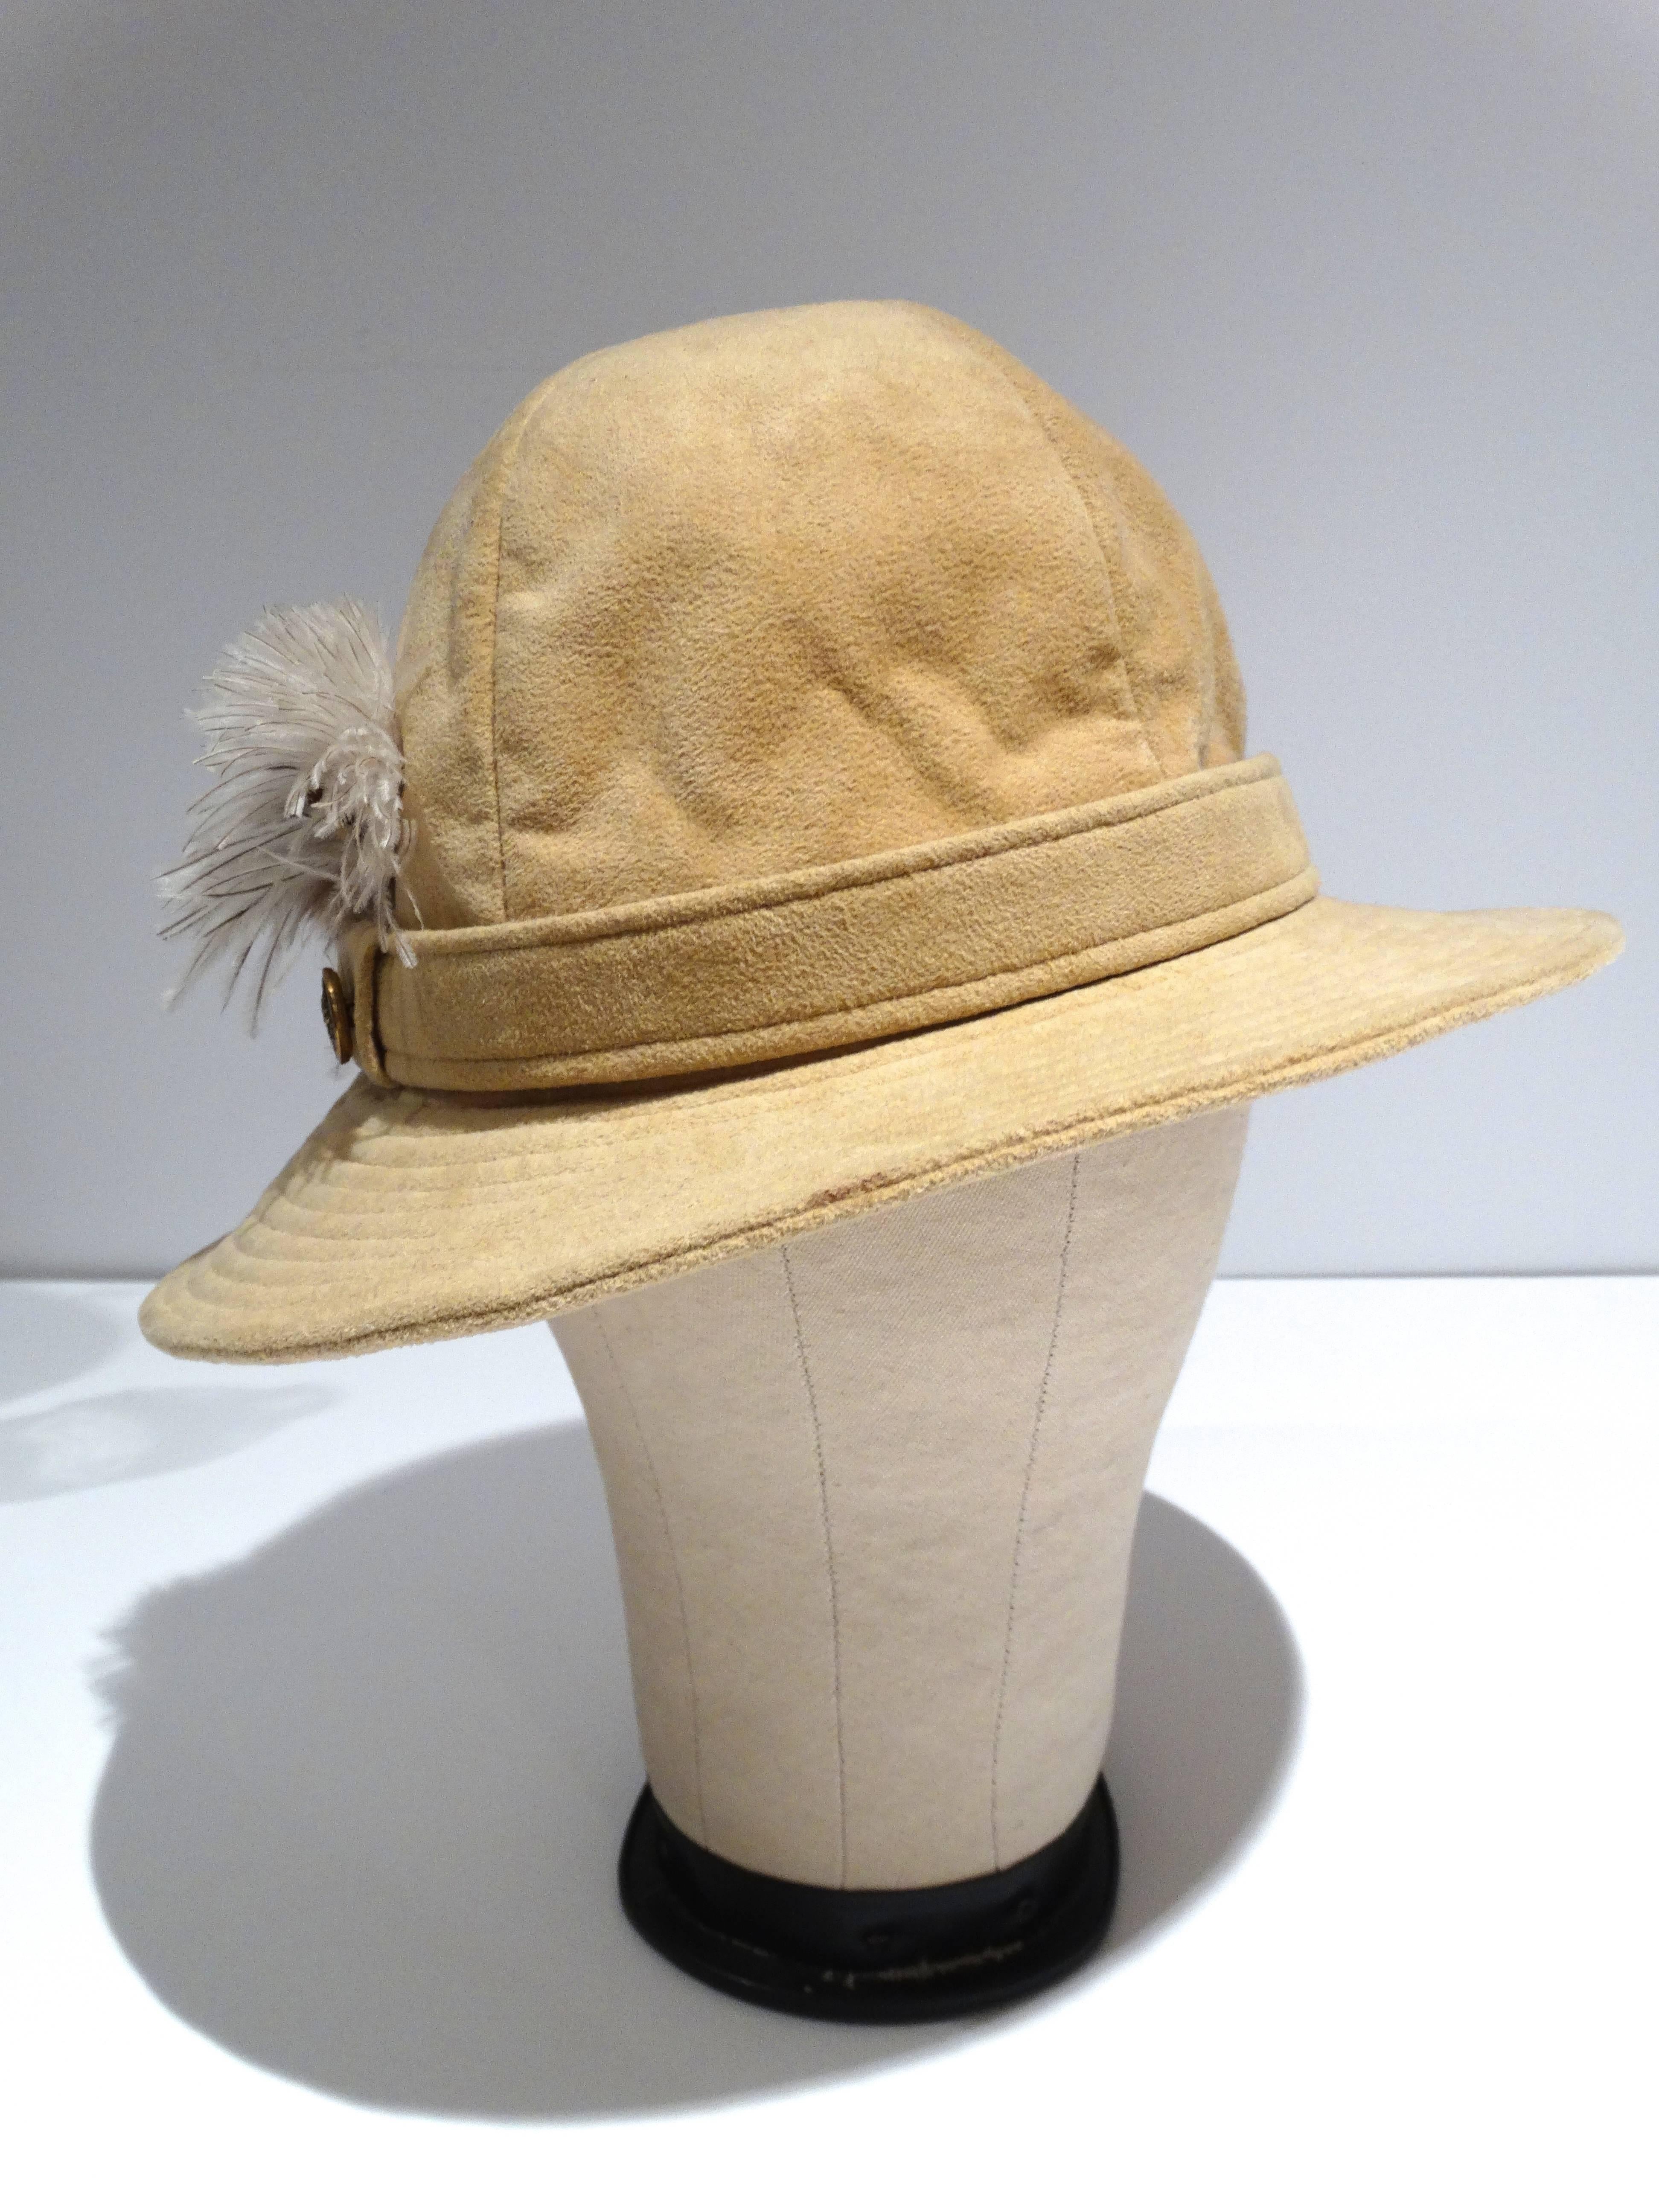 This vintage 1970's Adolfo Realites for Neiman Marcus is absolutely stunning. It does have an air of bohemian glam. Something that Bridgitte Bardot would wear. The hat features a cluster of pheasant and ostrich feathers. In a light beige suede with